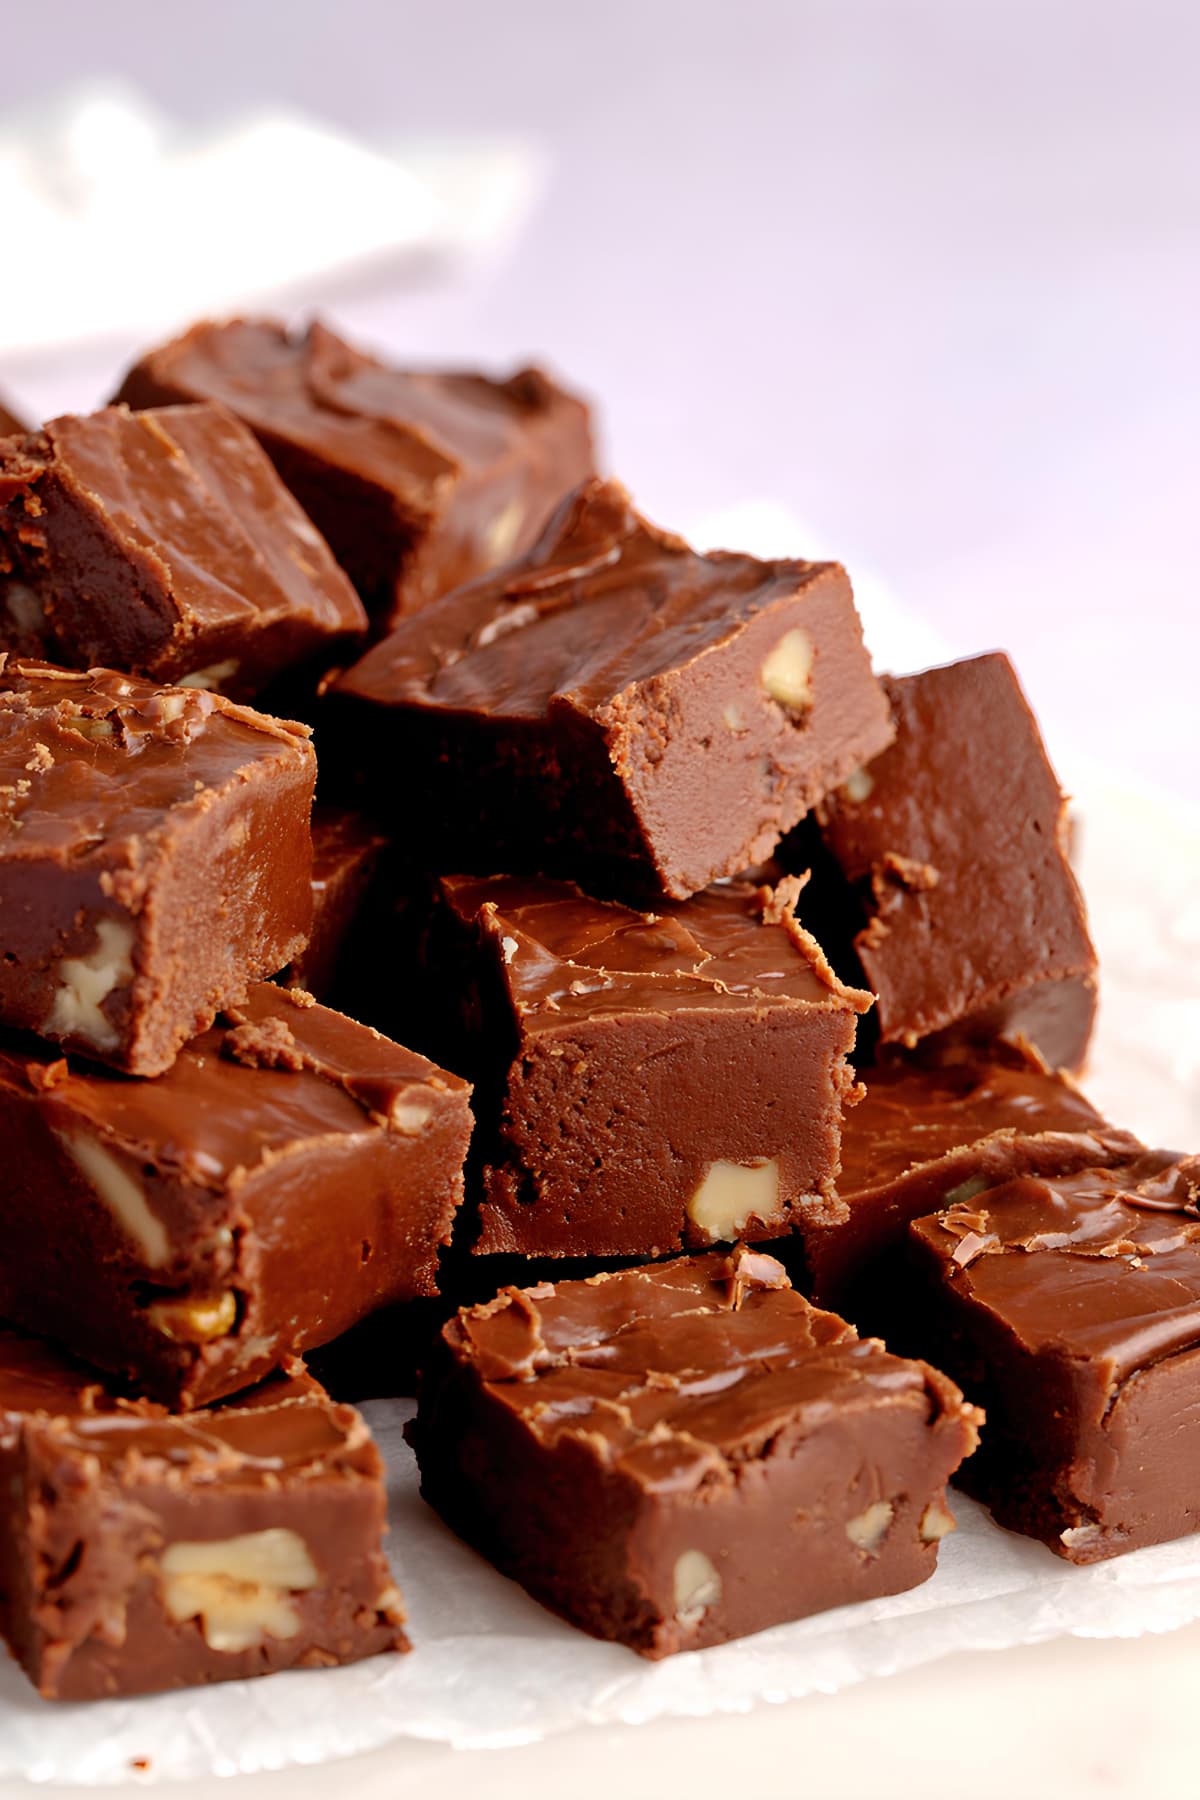 Bunch of chocolate fudge made with  made with chocolate chips, marshmallow creme, and chopped walnuts.